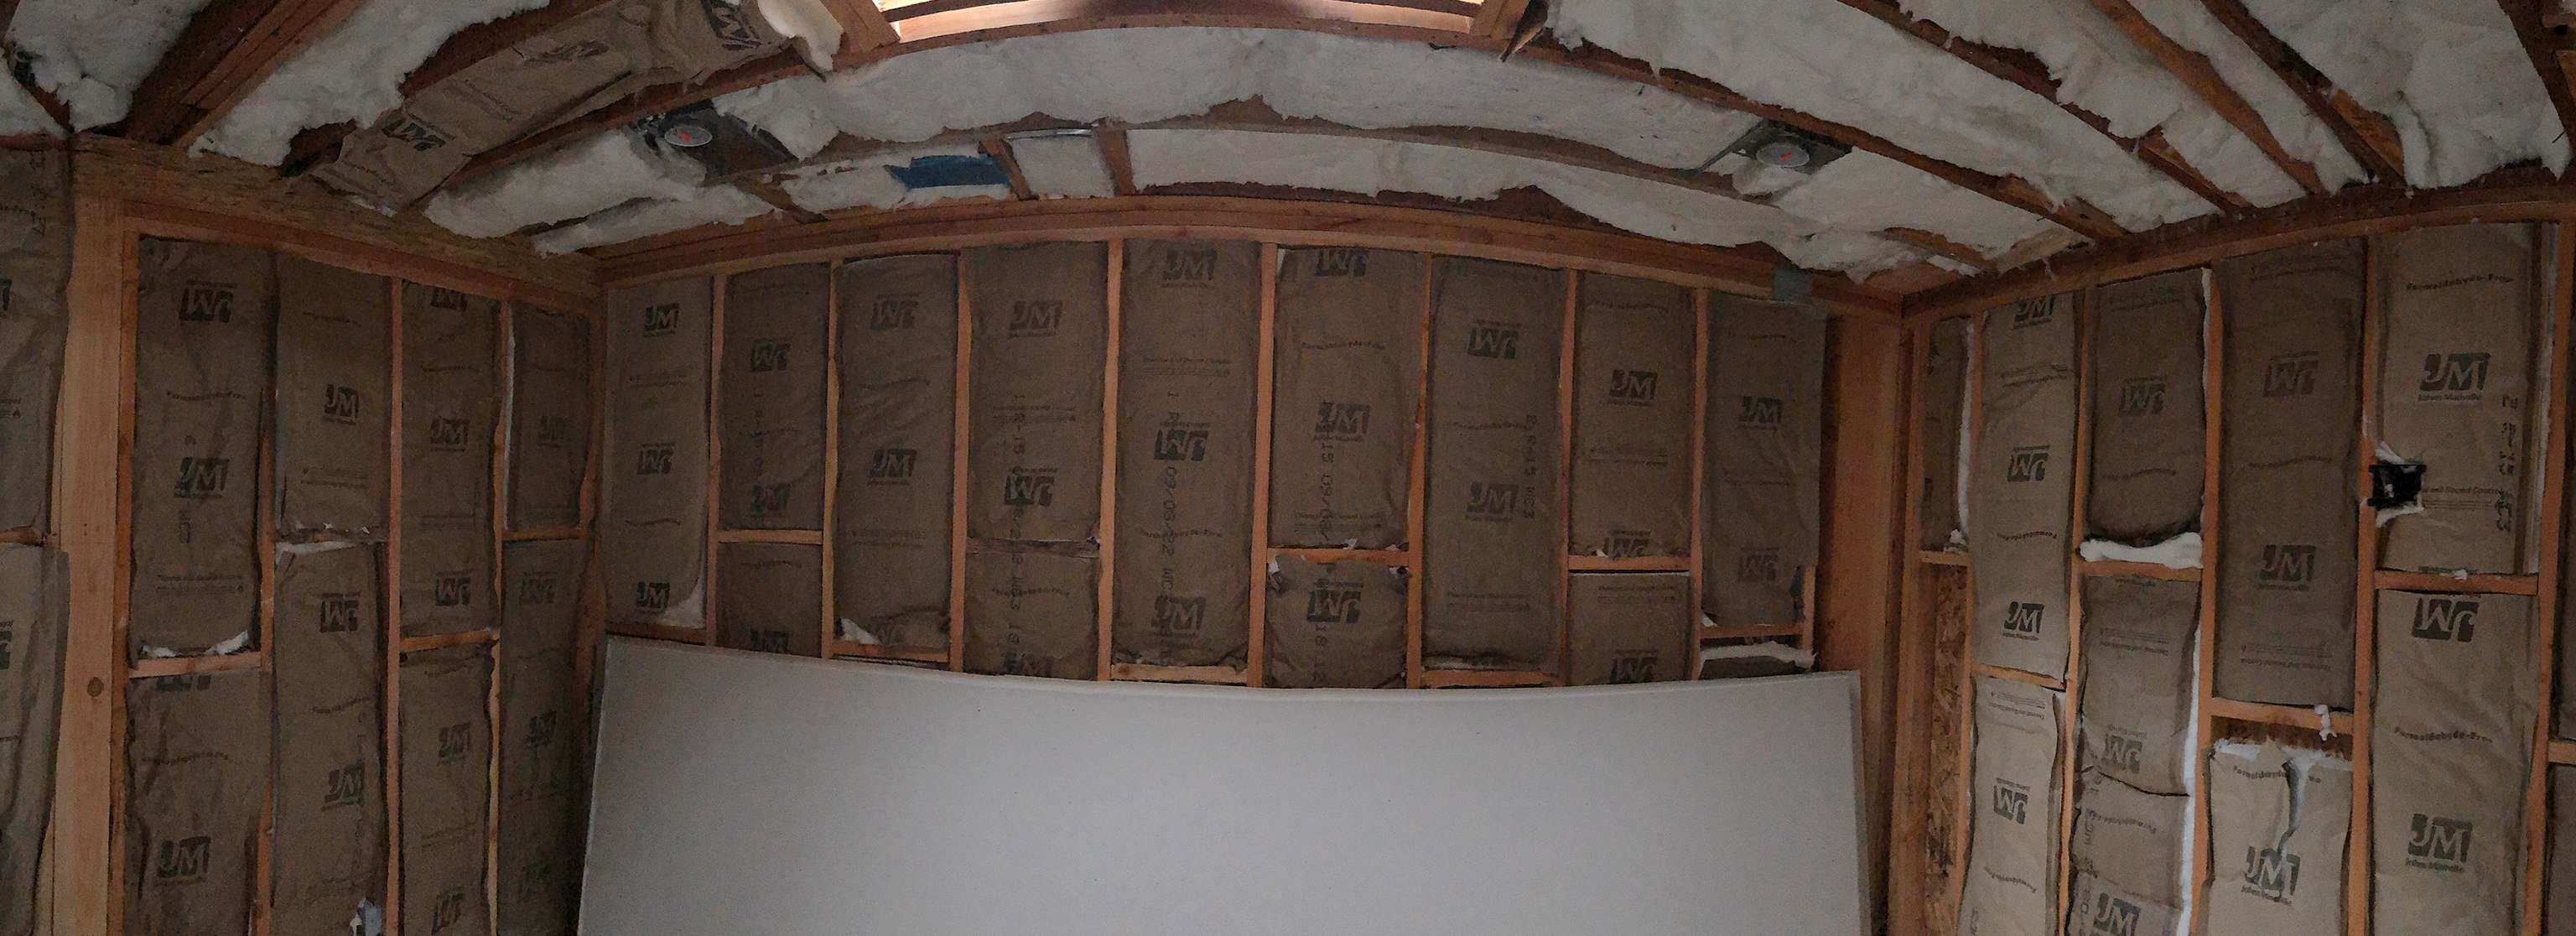 panorama-view_JM-fiberglass-insulation-in-the-framed-studs,-joists,-and-beams